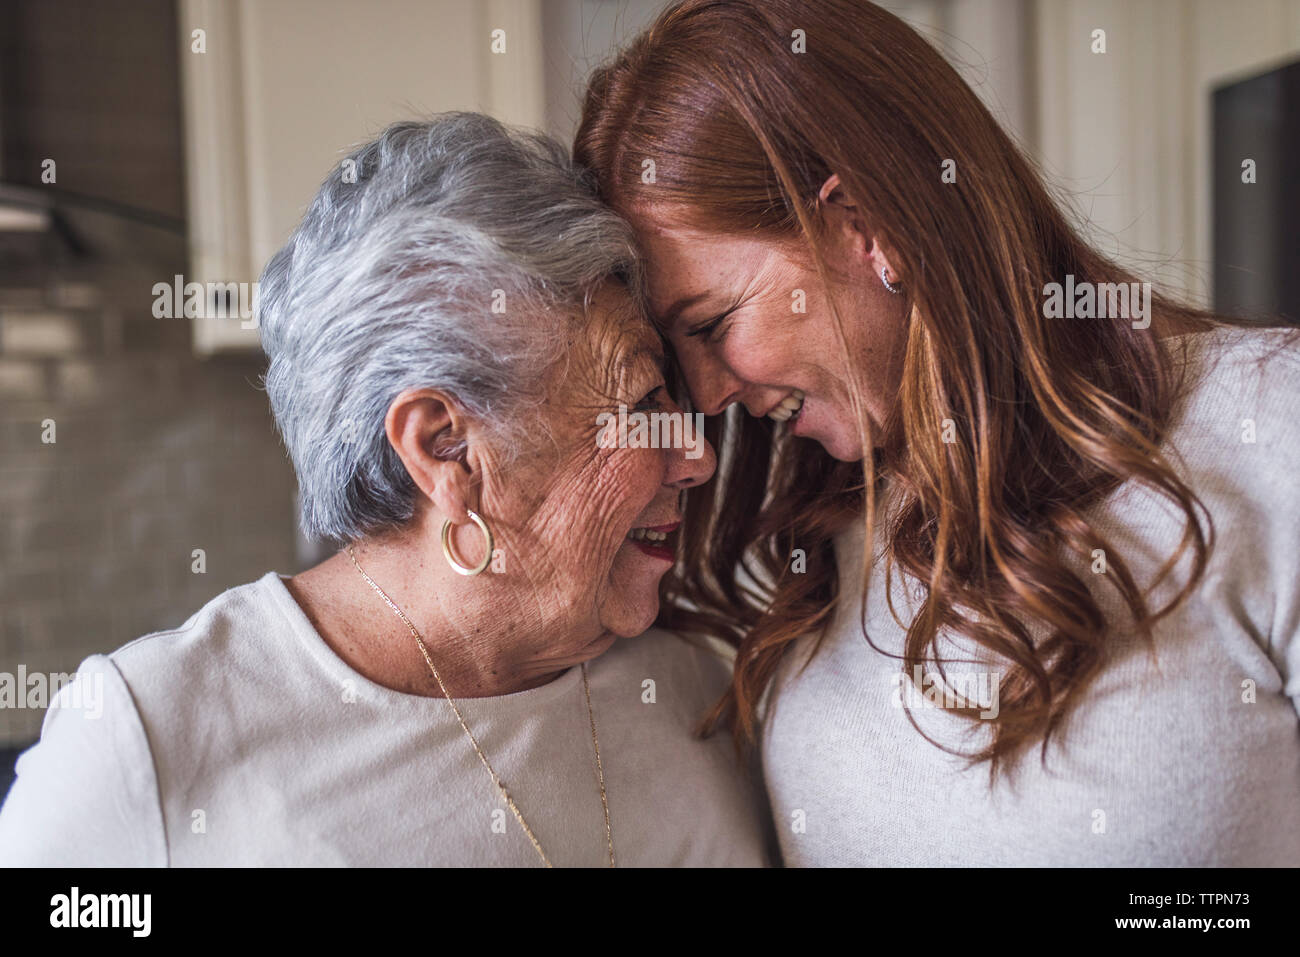 Close up of Senior woman and adult granddaughter touching foreheads Stock Photo